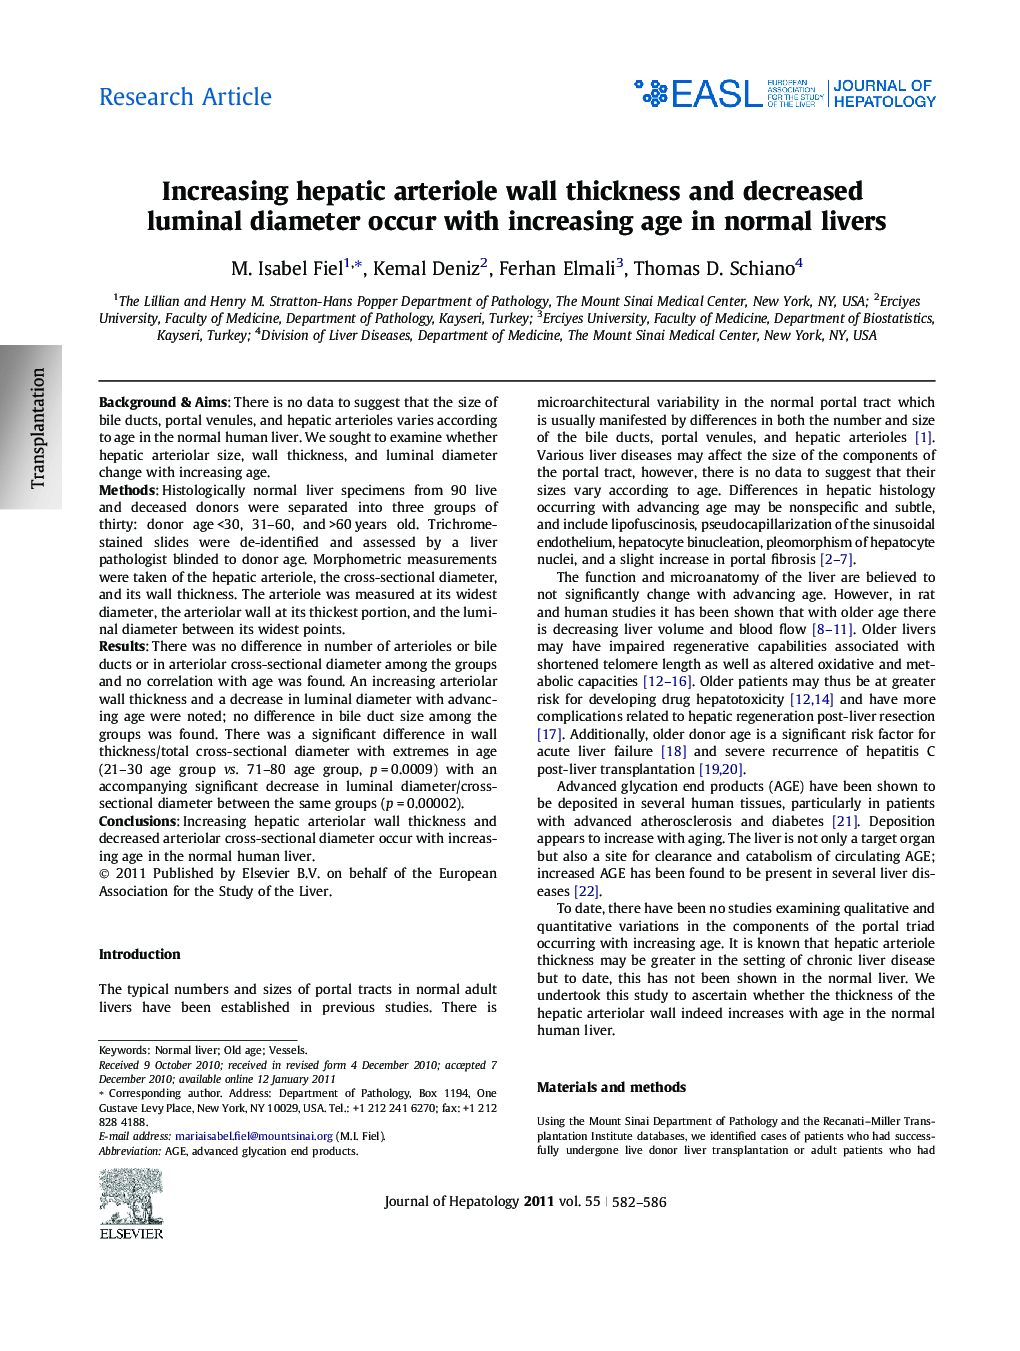 Research ArticleIncreasing hepatic arteriole wall thickness and decreased luminal diameter occur with increasing age in normal livers